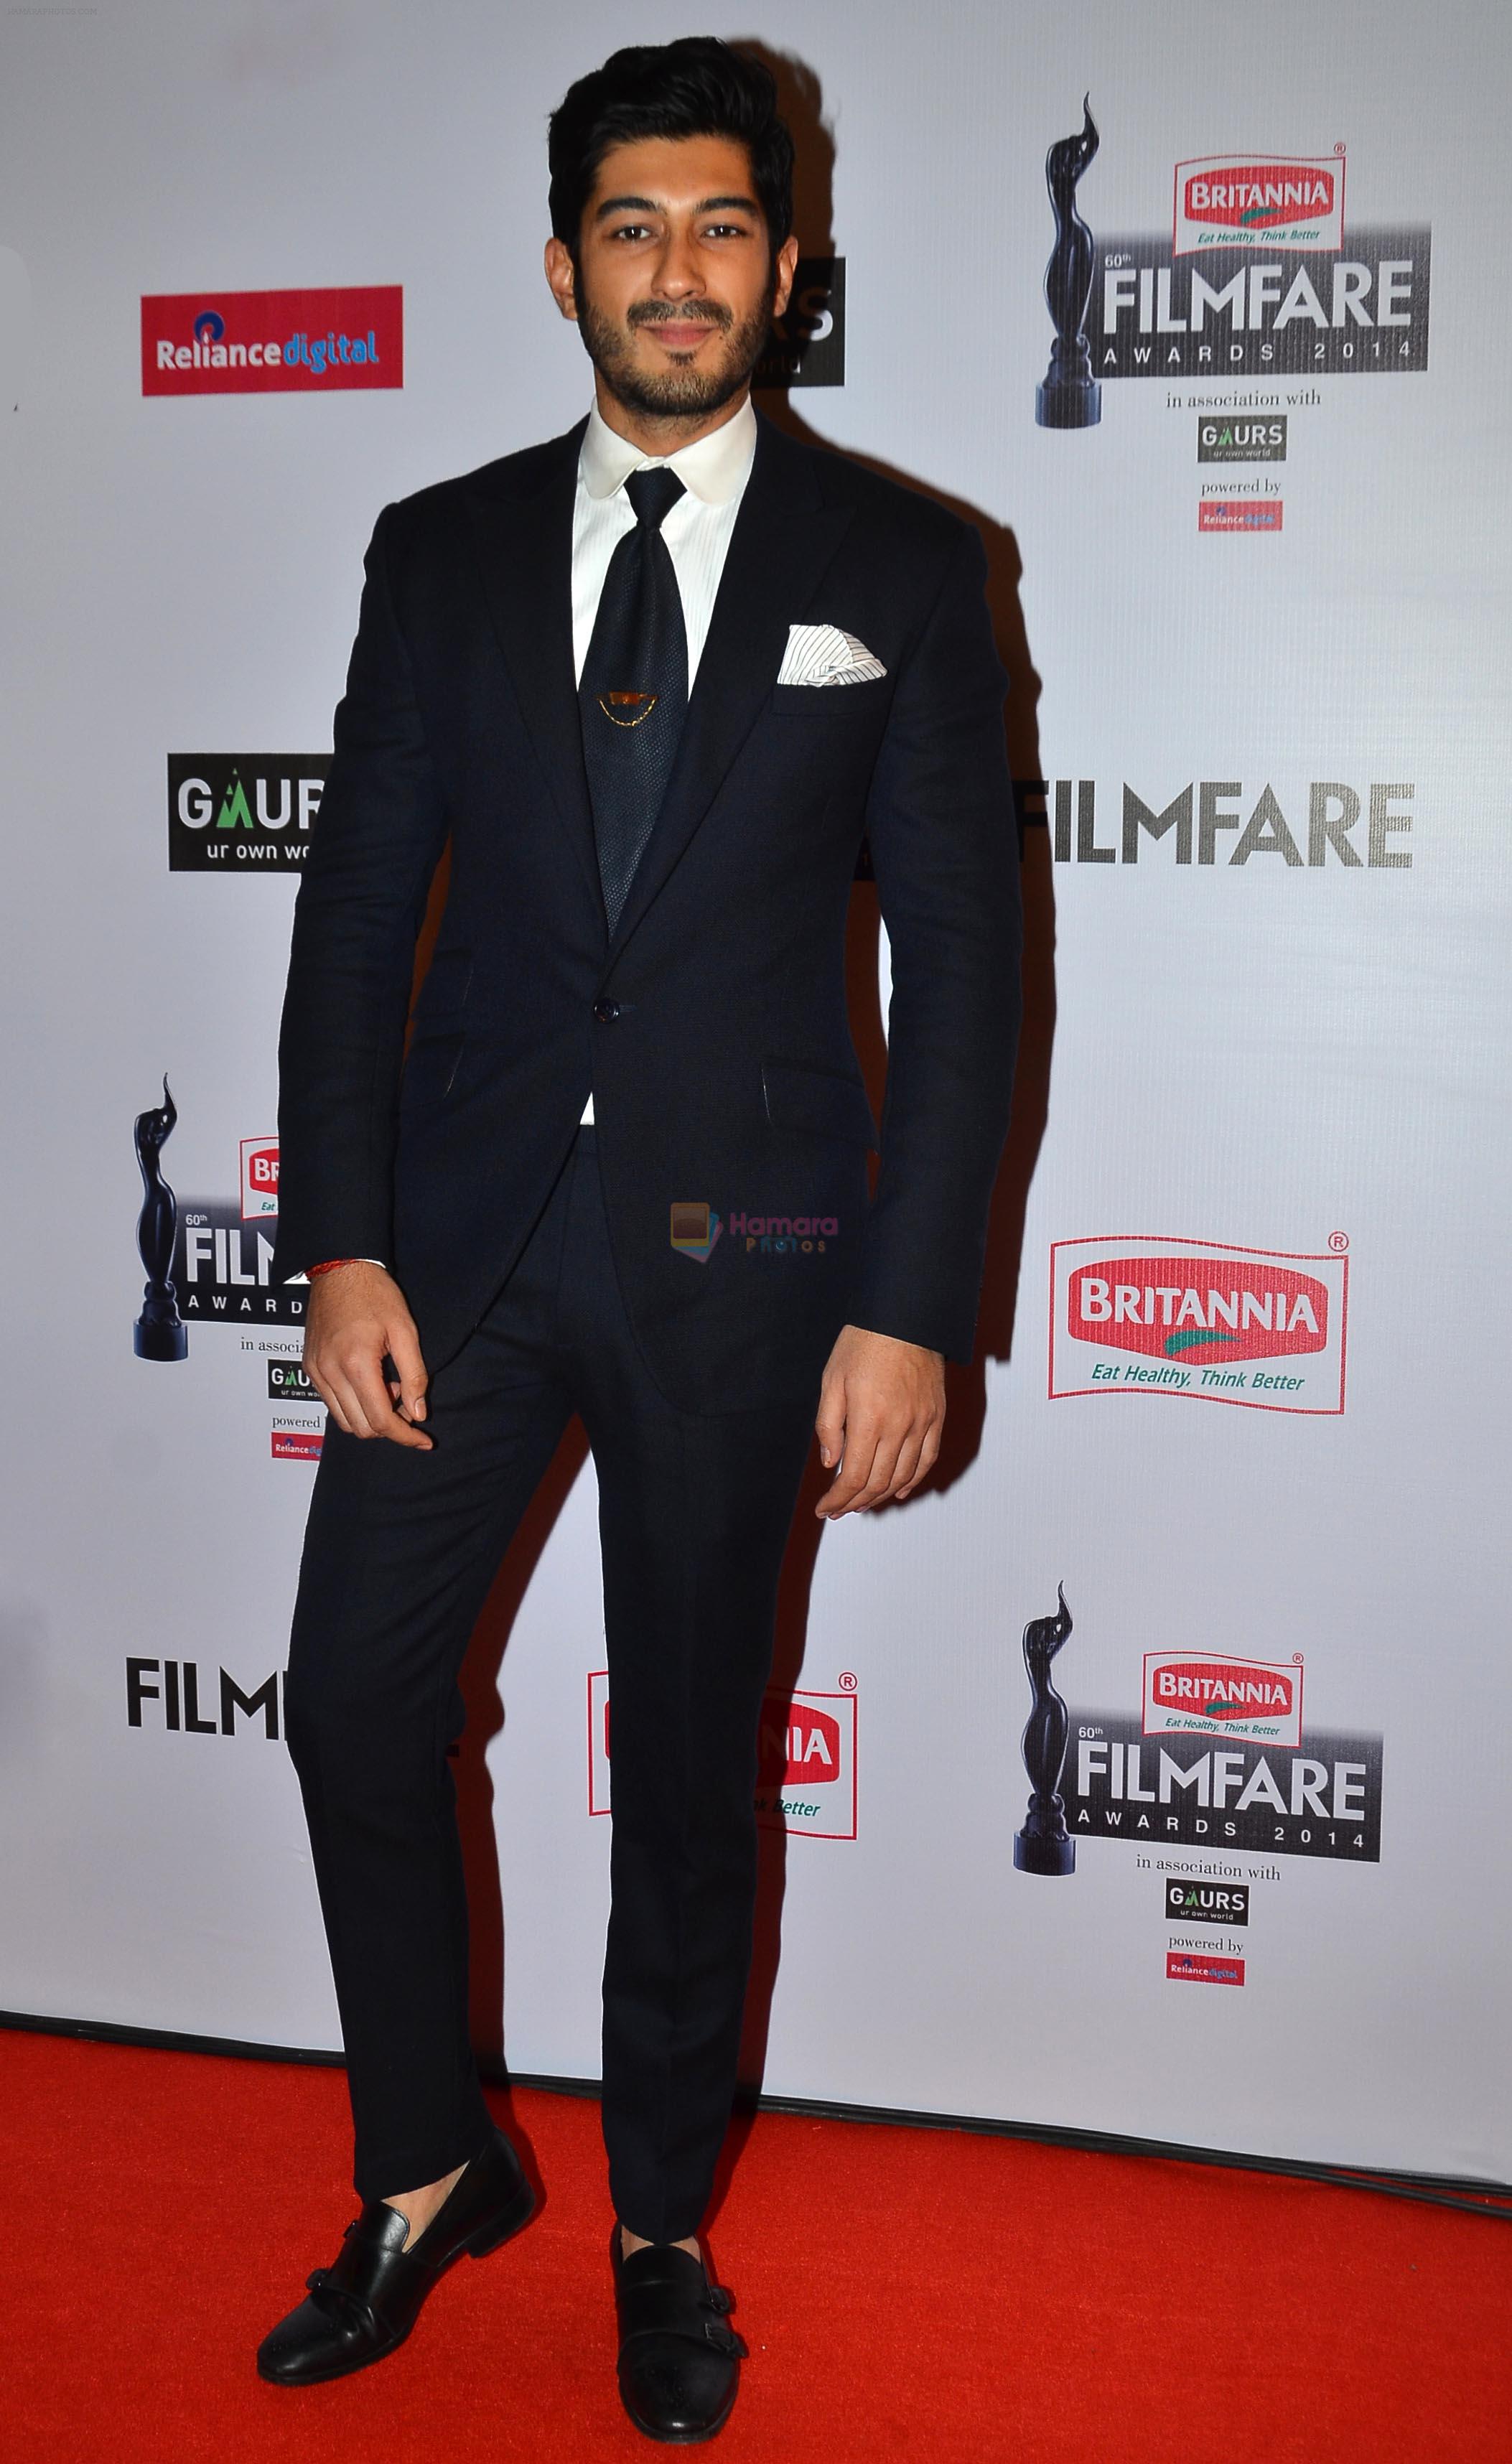 Mohit Marwah graces the red carpet at the 60th Britannia Filmfare Awards